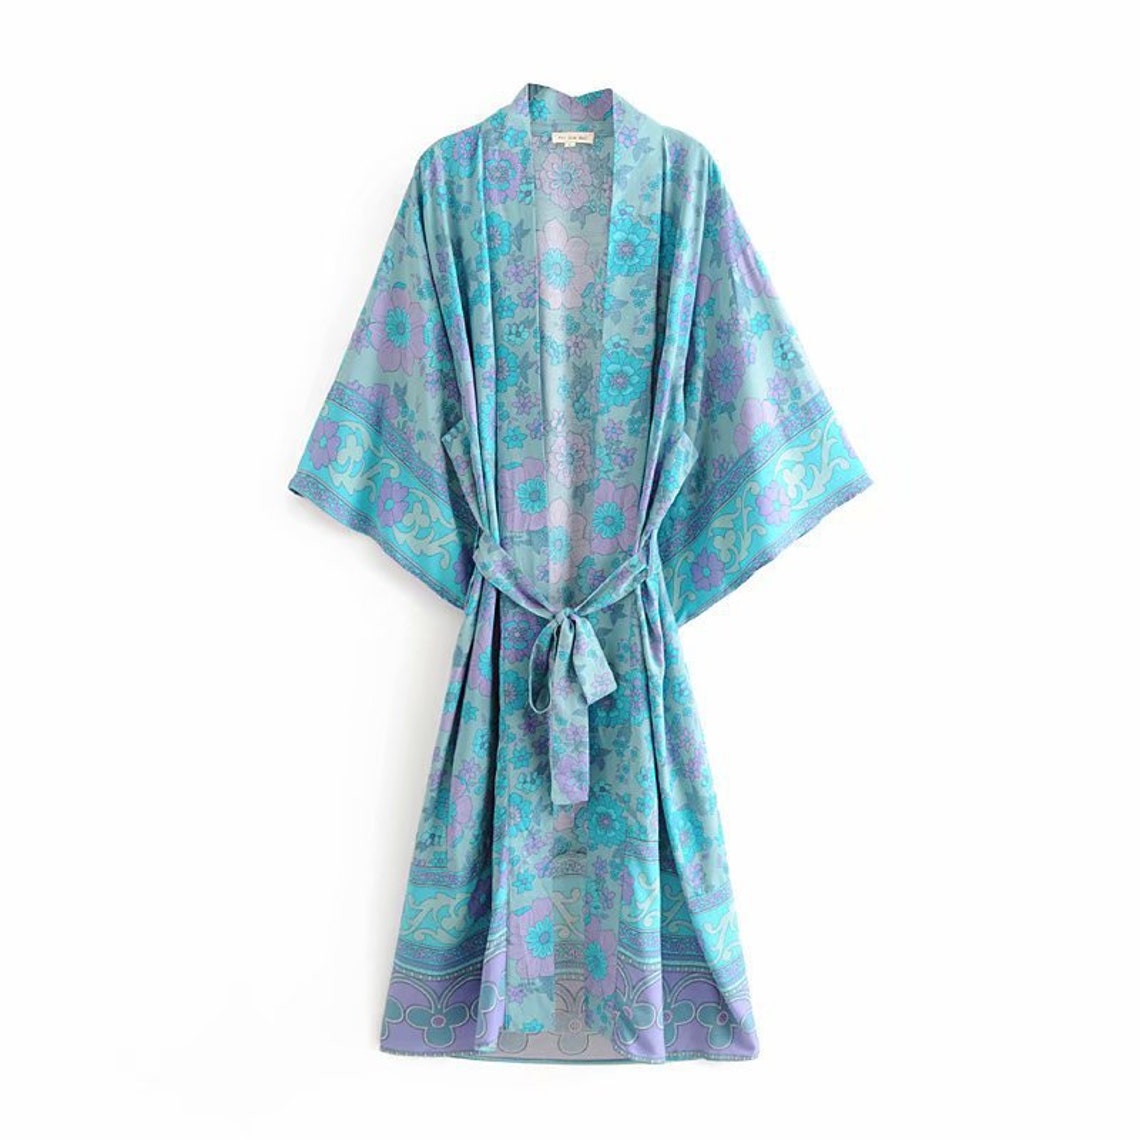 Robes for women Beach cover up Long Kimono Swim suit cover | Etsy